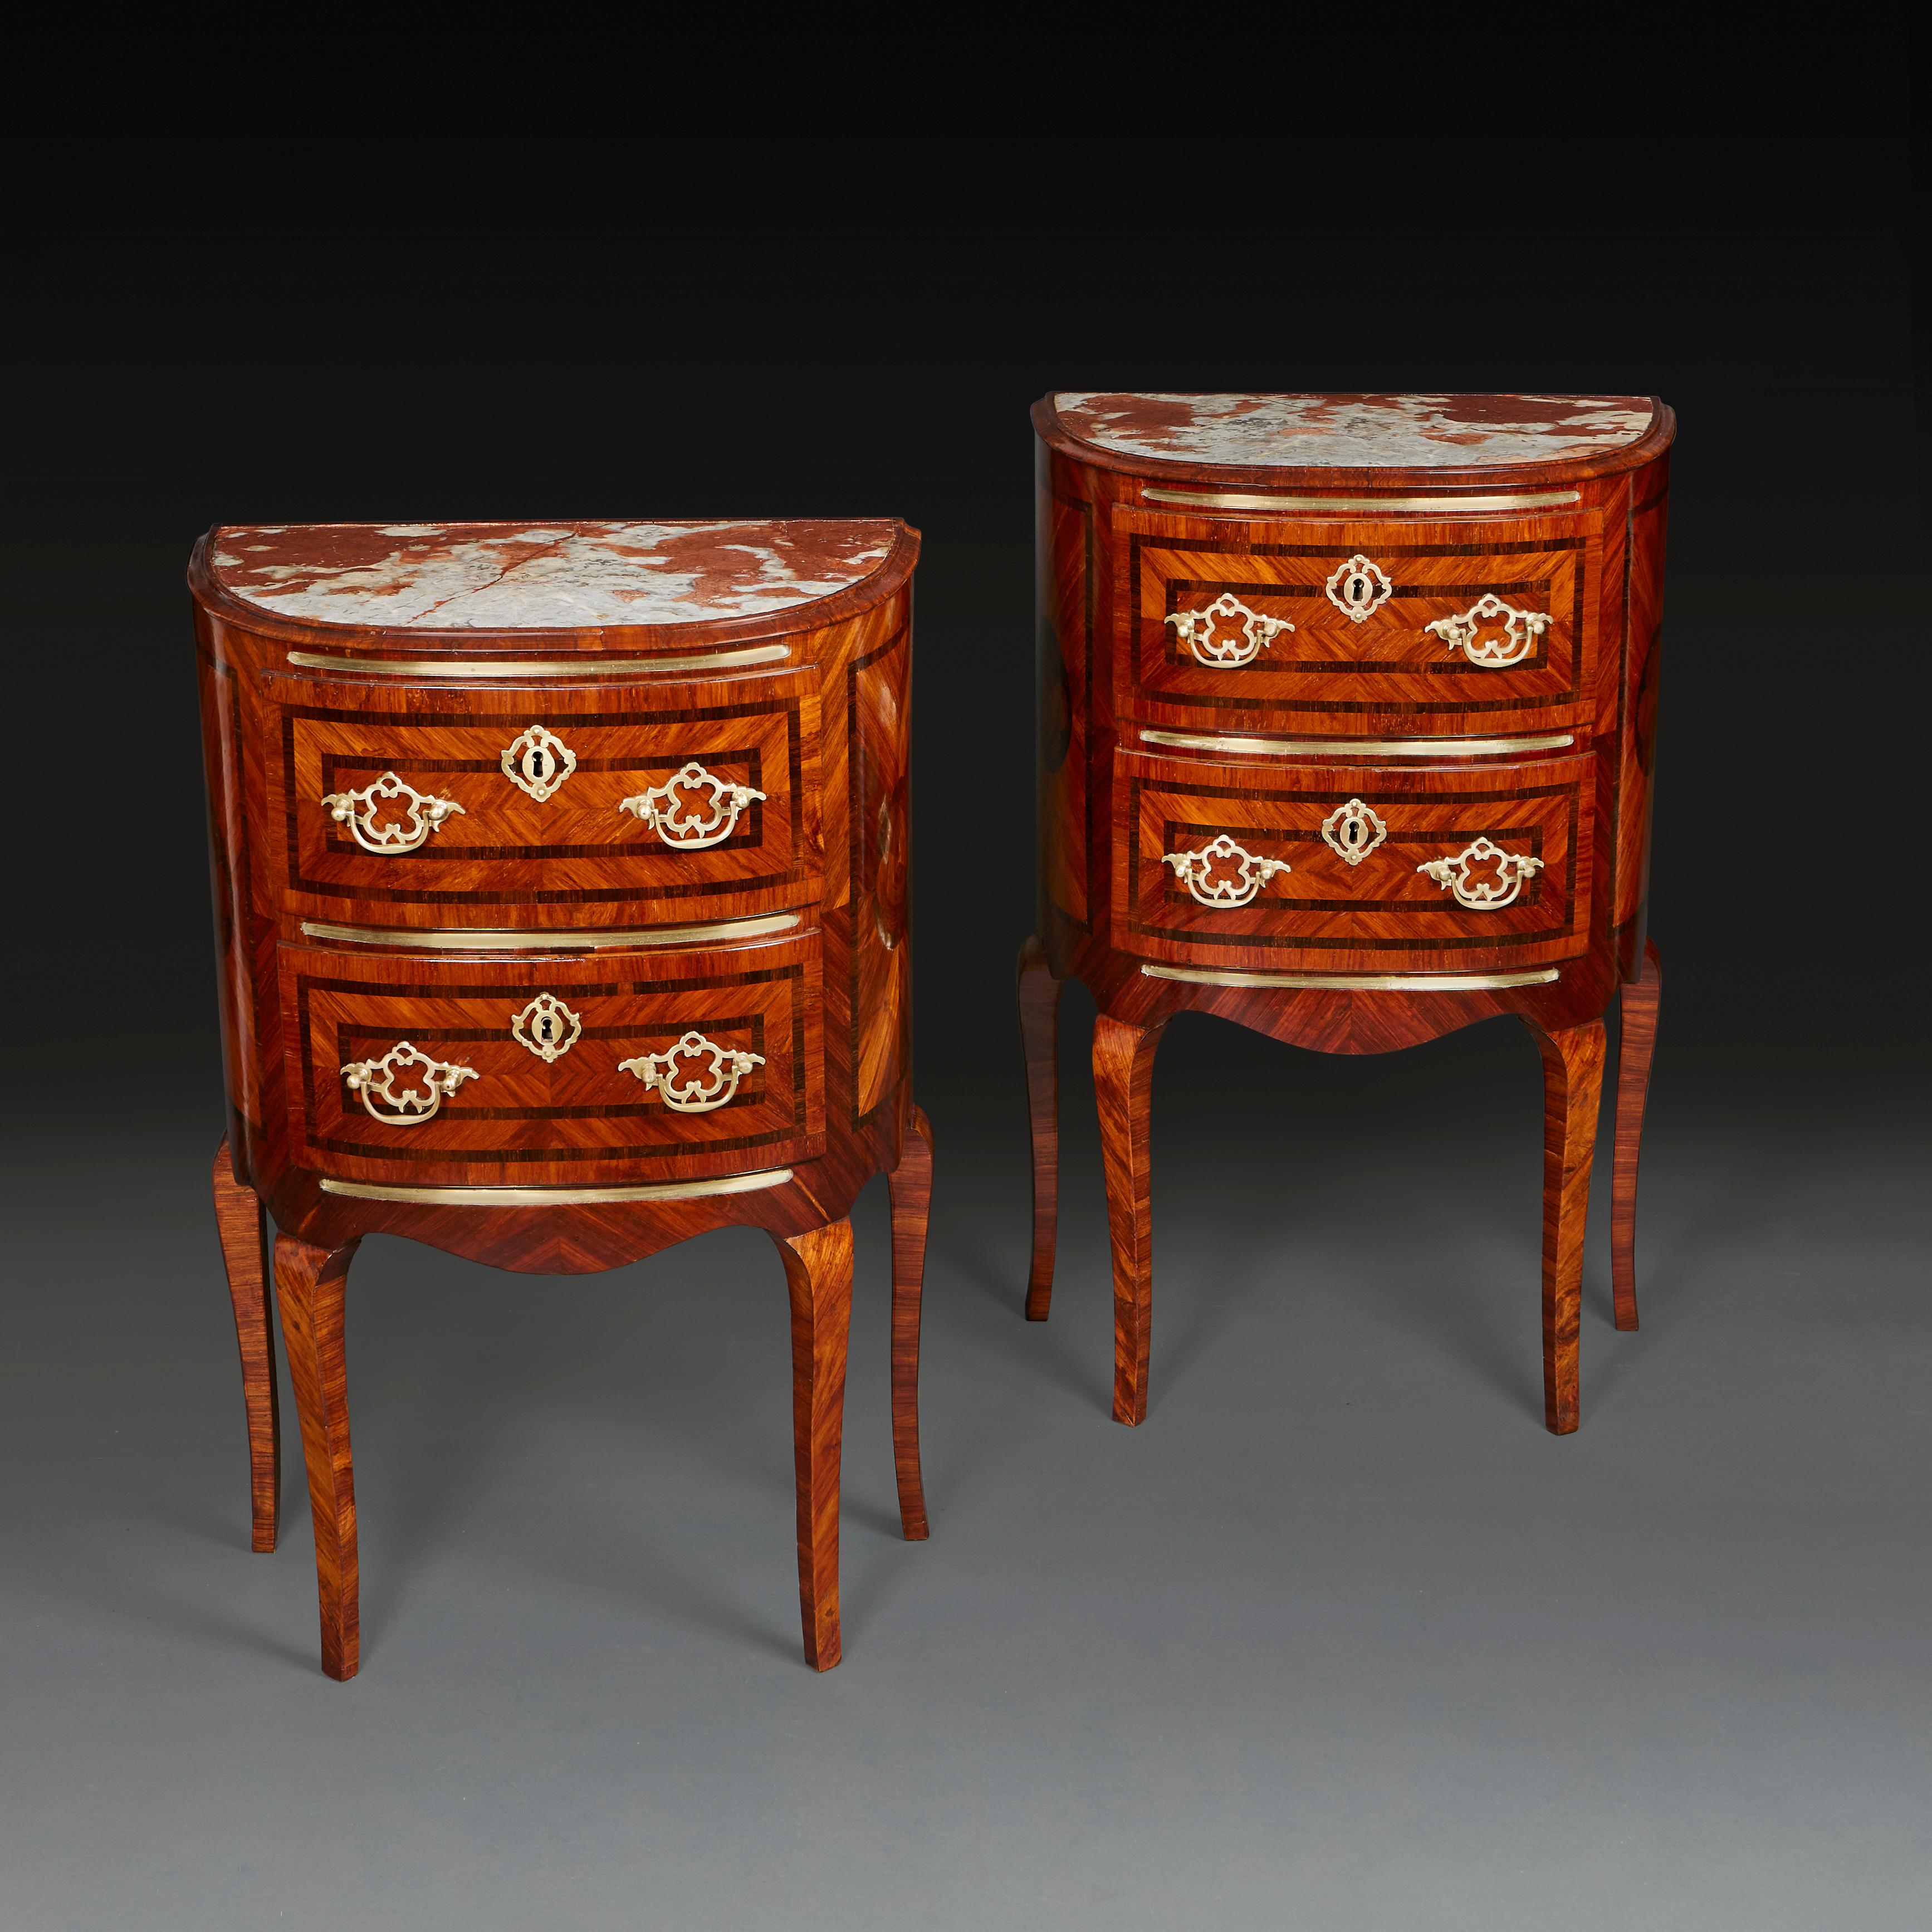 Italian A Pair of 19th Century Roman Bedside Tables with Marquetry and Marble Tops For Sale